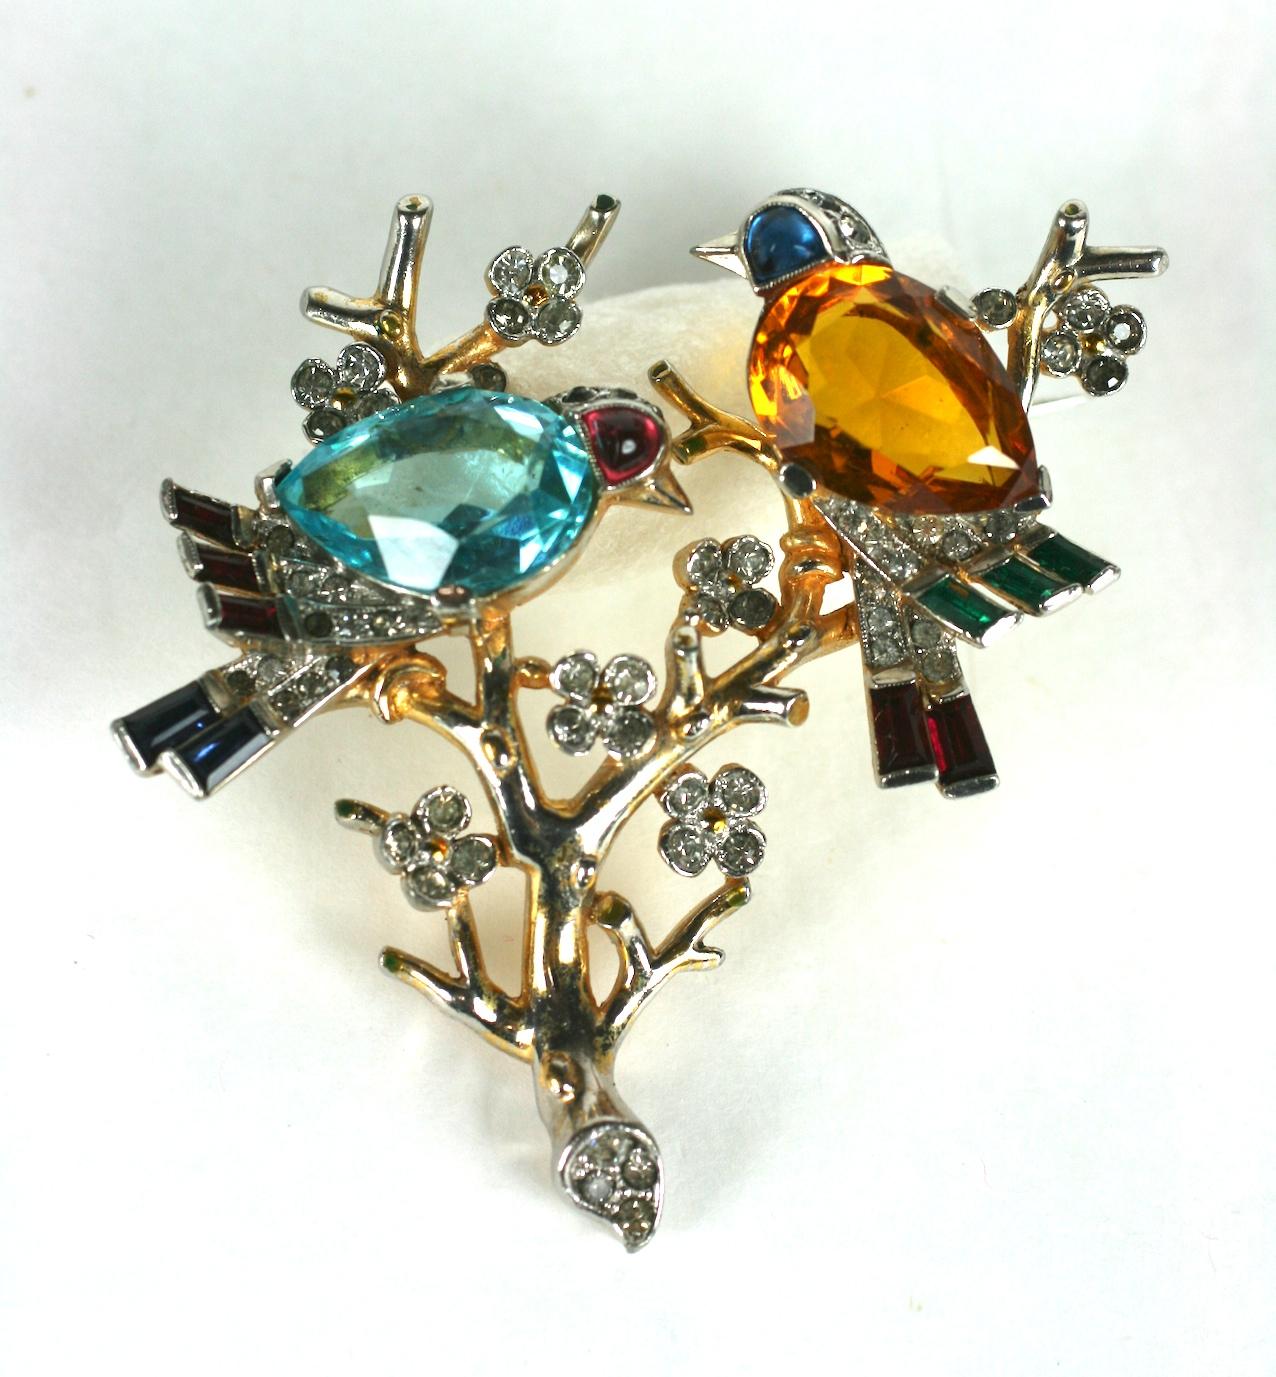 Super Rare Trifari Art Deco Birds on Branch by Alfred Phillipe circa 1930's. Beautiful design of 2 Art Deco birds perched on a branch with tiny pave flower buds. Large teardrop aquamarine and citrine pear shaped paste stones form the bodies with